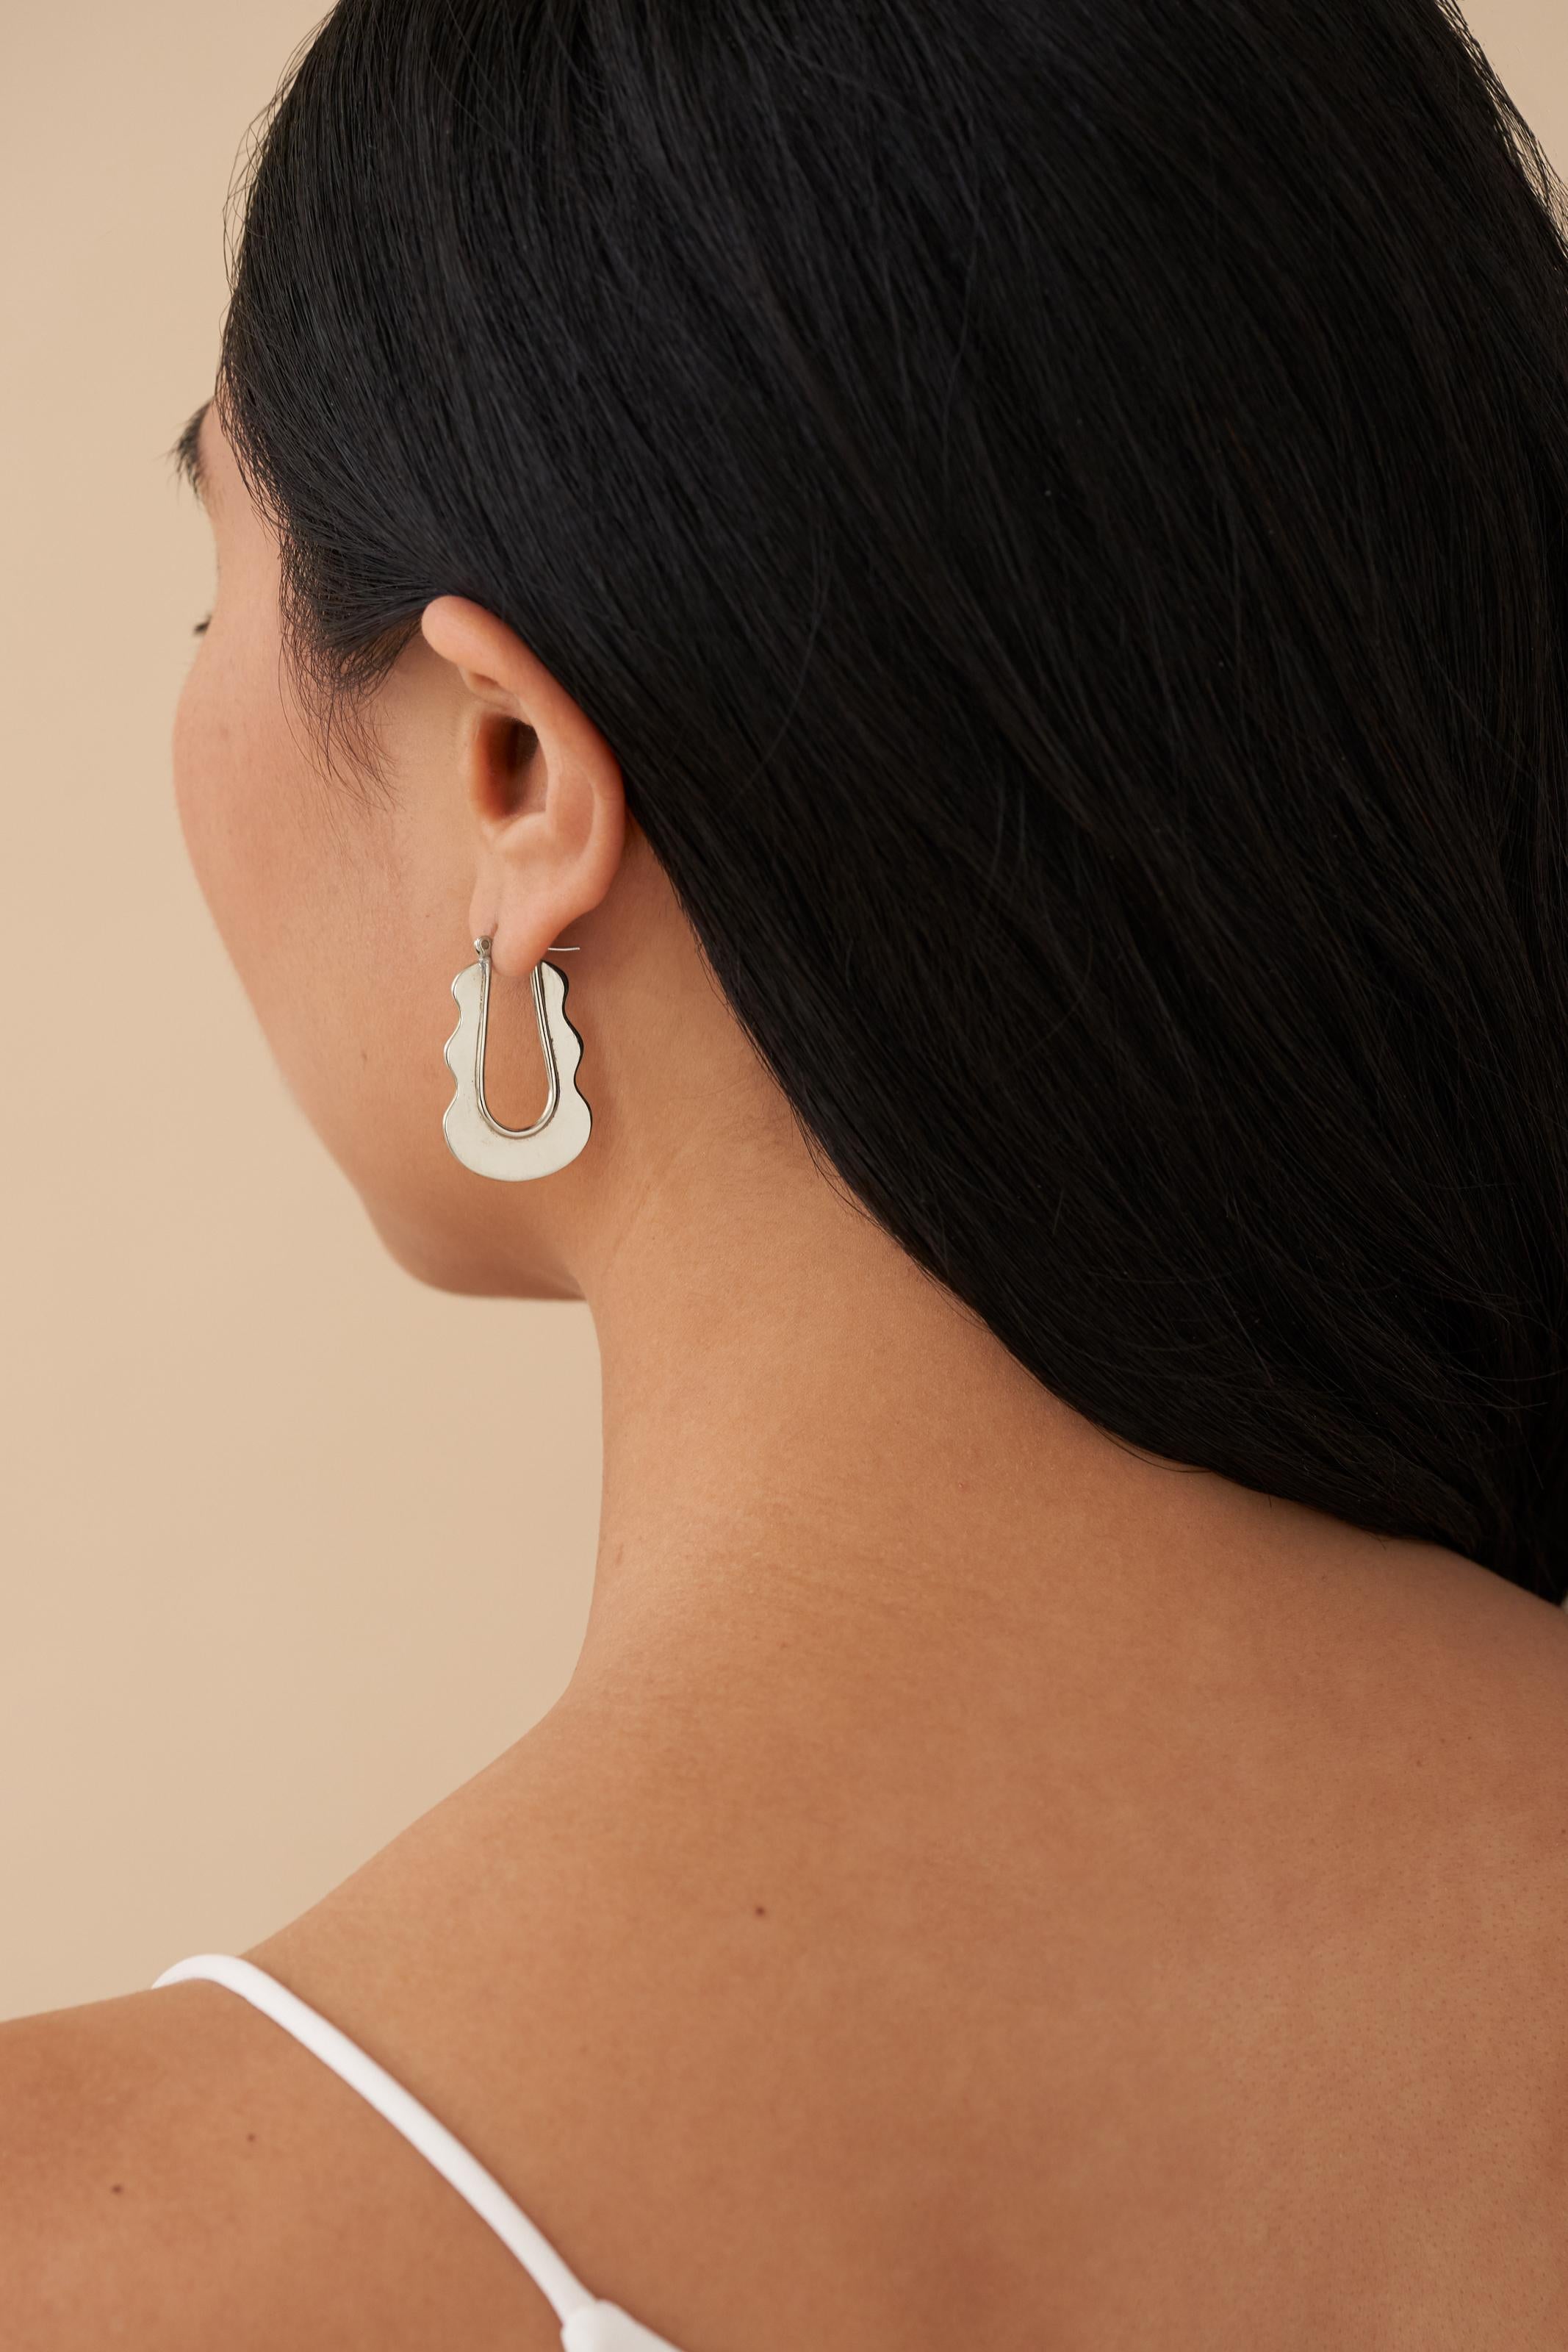 Seeking a subtle statement? Look no further. Our scaled-down version of the Mirage Hoops are the perfect fit. Inspired by Ettore Sottsass’ renowned Ultrafragola mirror, these elegantly undulating hoops add a distinctive touch to any ensemble.